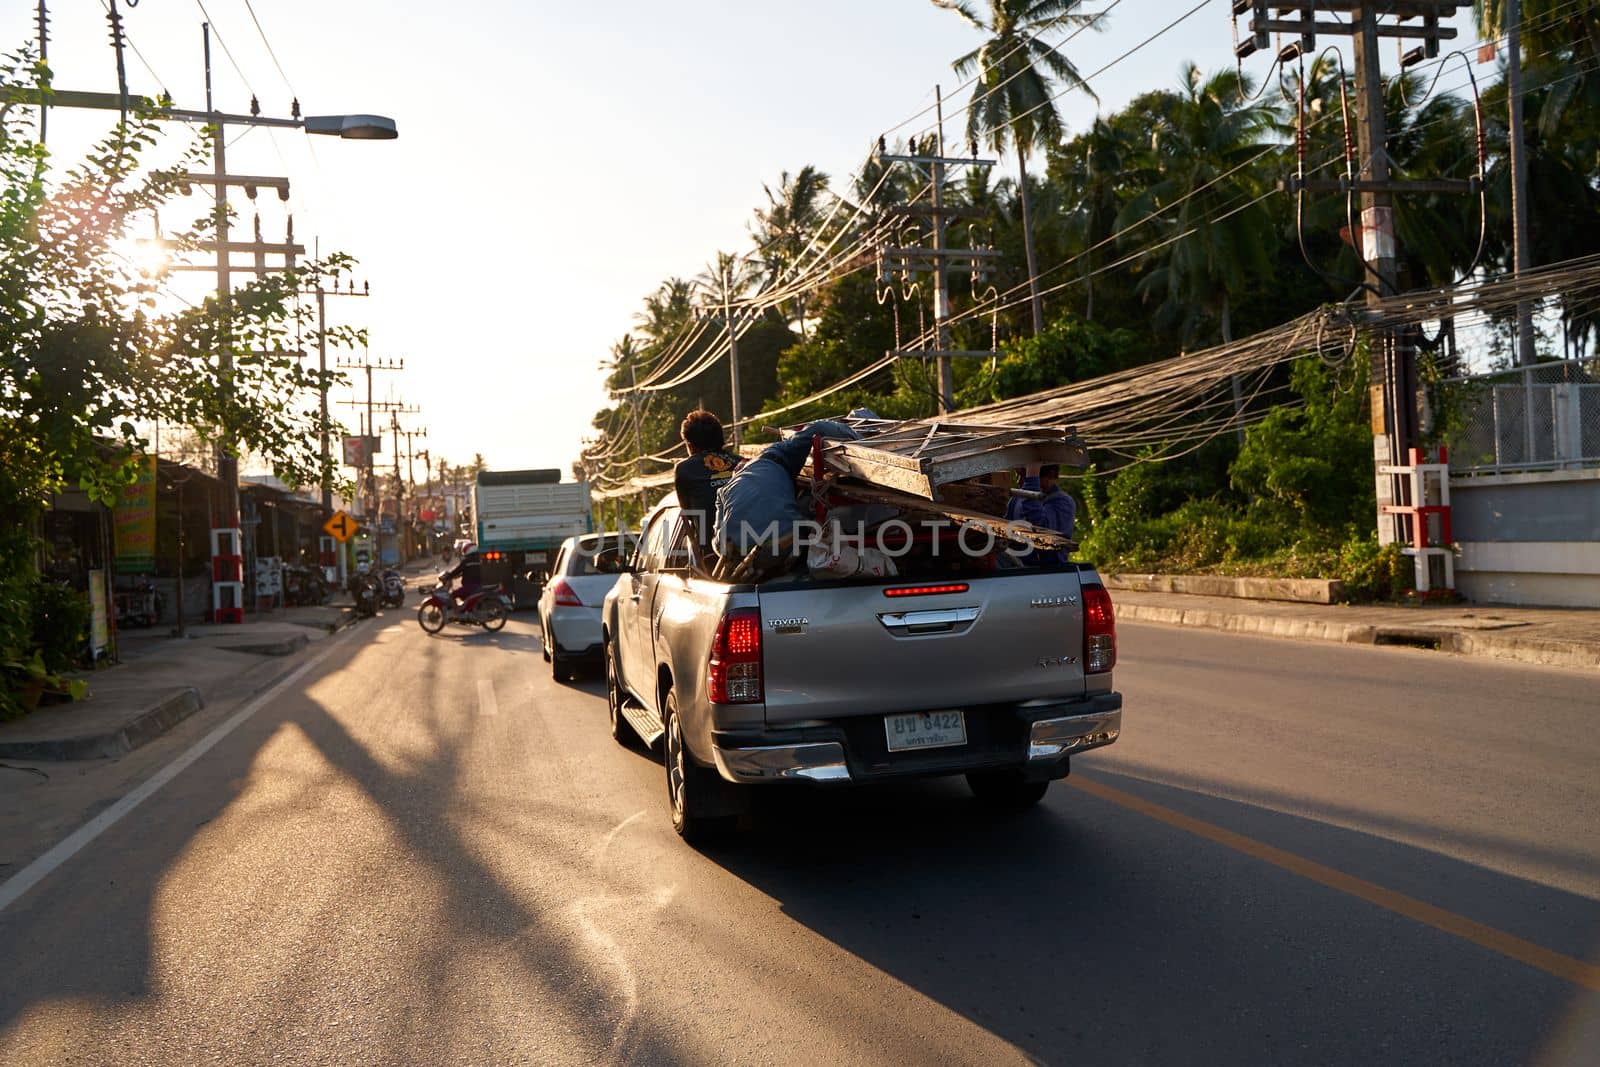 Atmospheric photo traffic on the street in Thailand during sunset. Koh Samui, Thailand - 09.15.2022